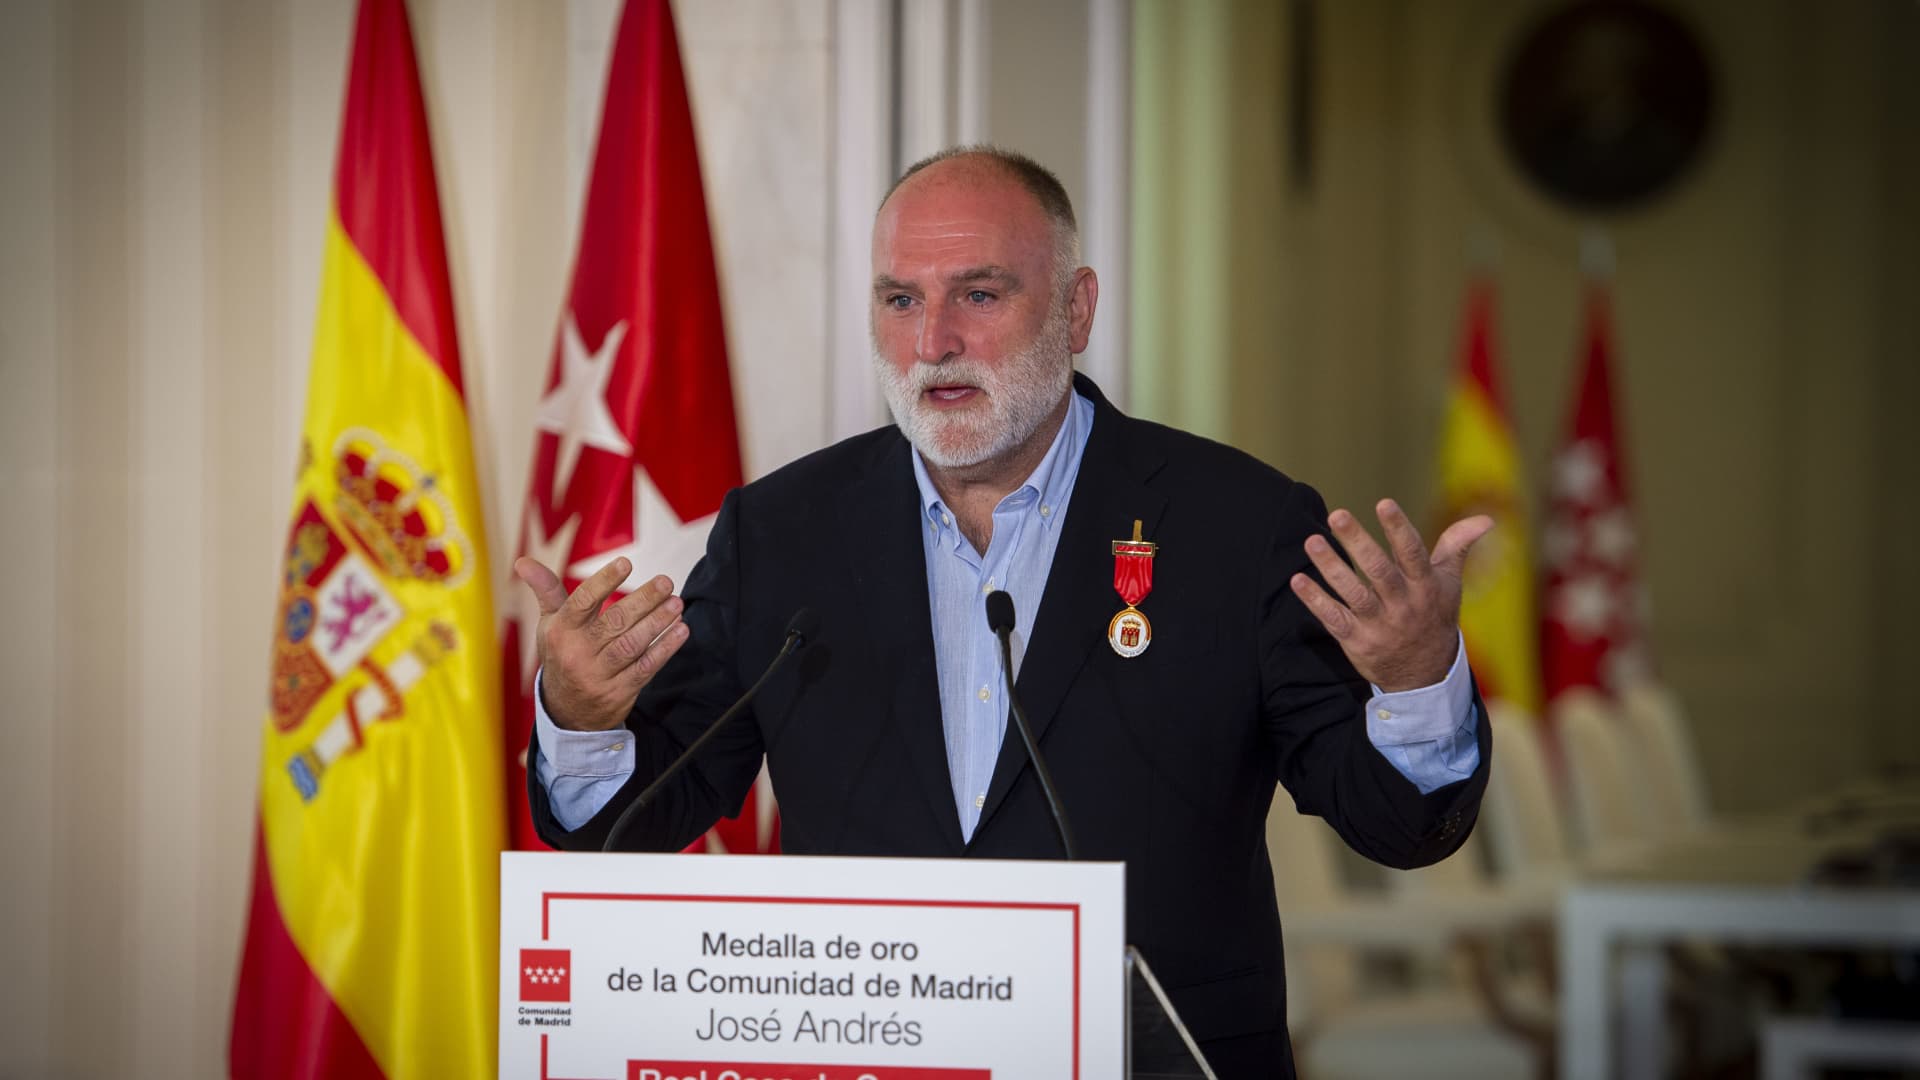 Chef Jose Andres received the Gold Medal from the President of the Community of Madrid for his solidarity work in Ukraine after the beginning of the war. Madrid, Spain, July 1, 2022.